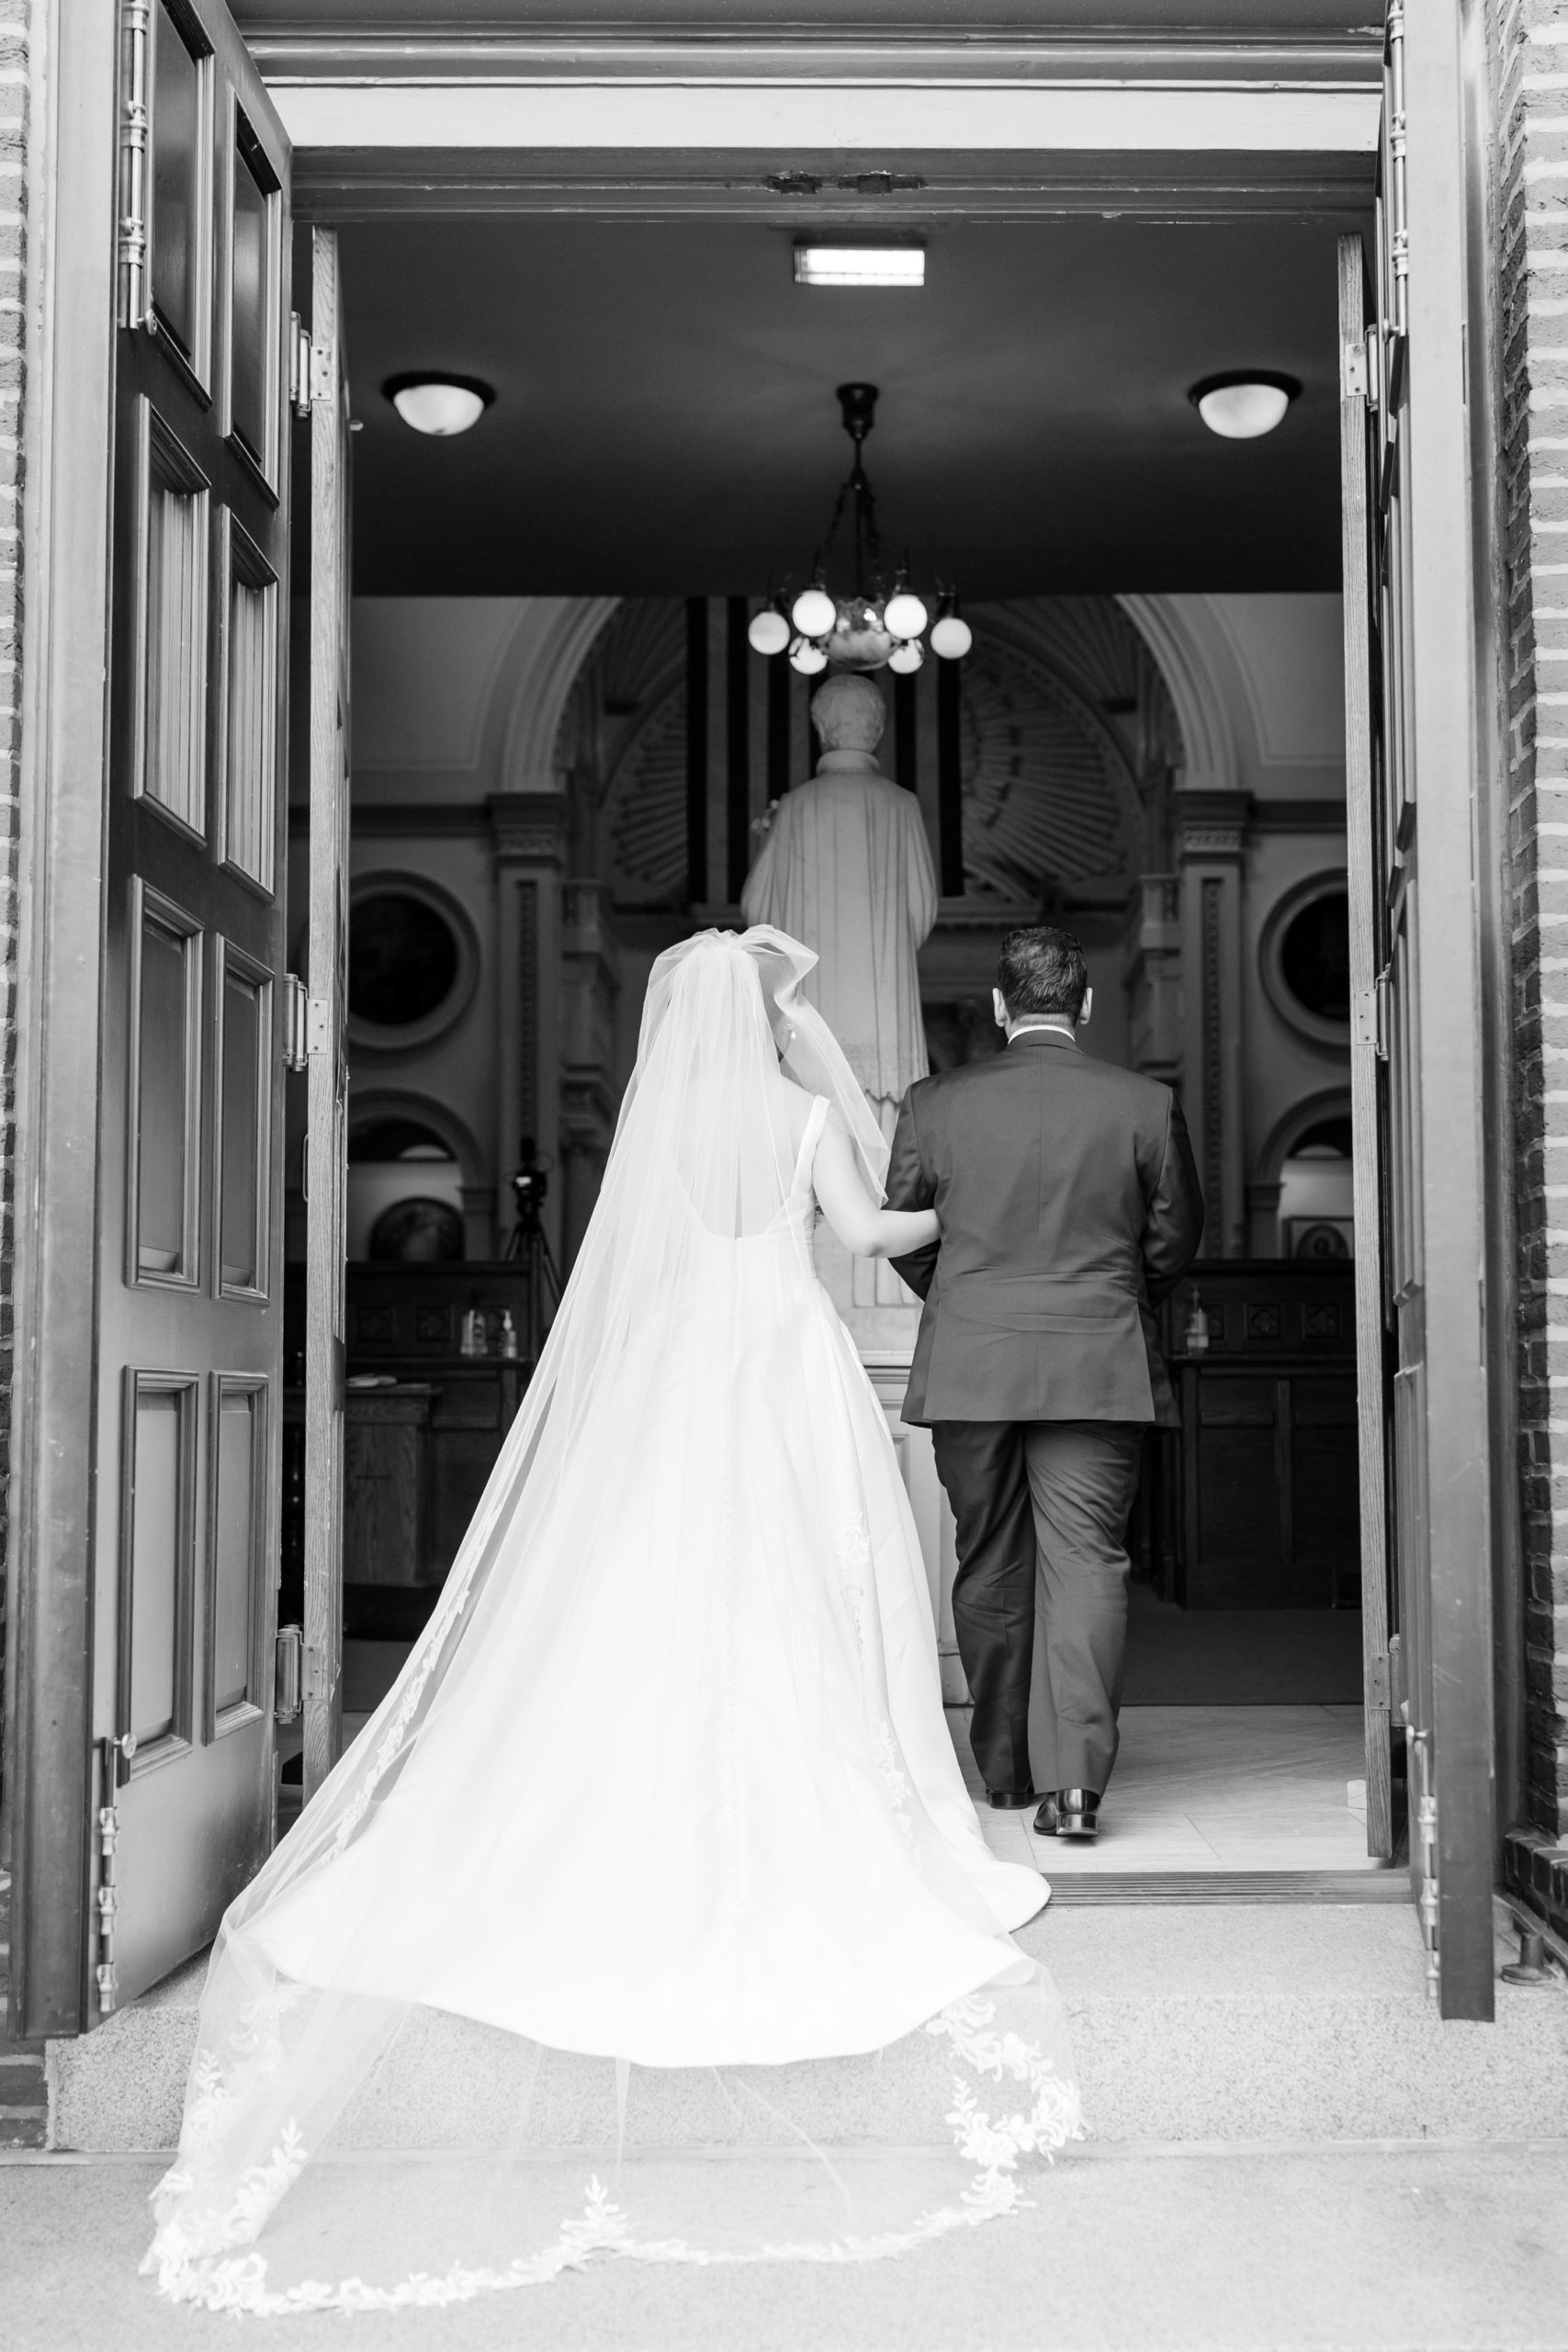 An intimate summer wedding in Washington, DC held at the iconic Army Navy Club with portraits at the Lincoln Memorial and White House.